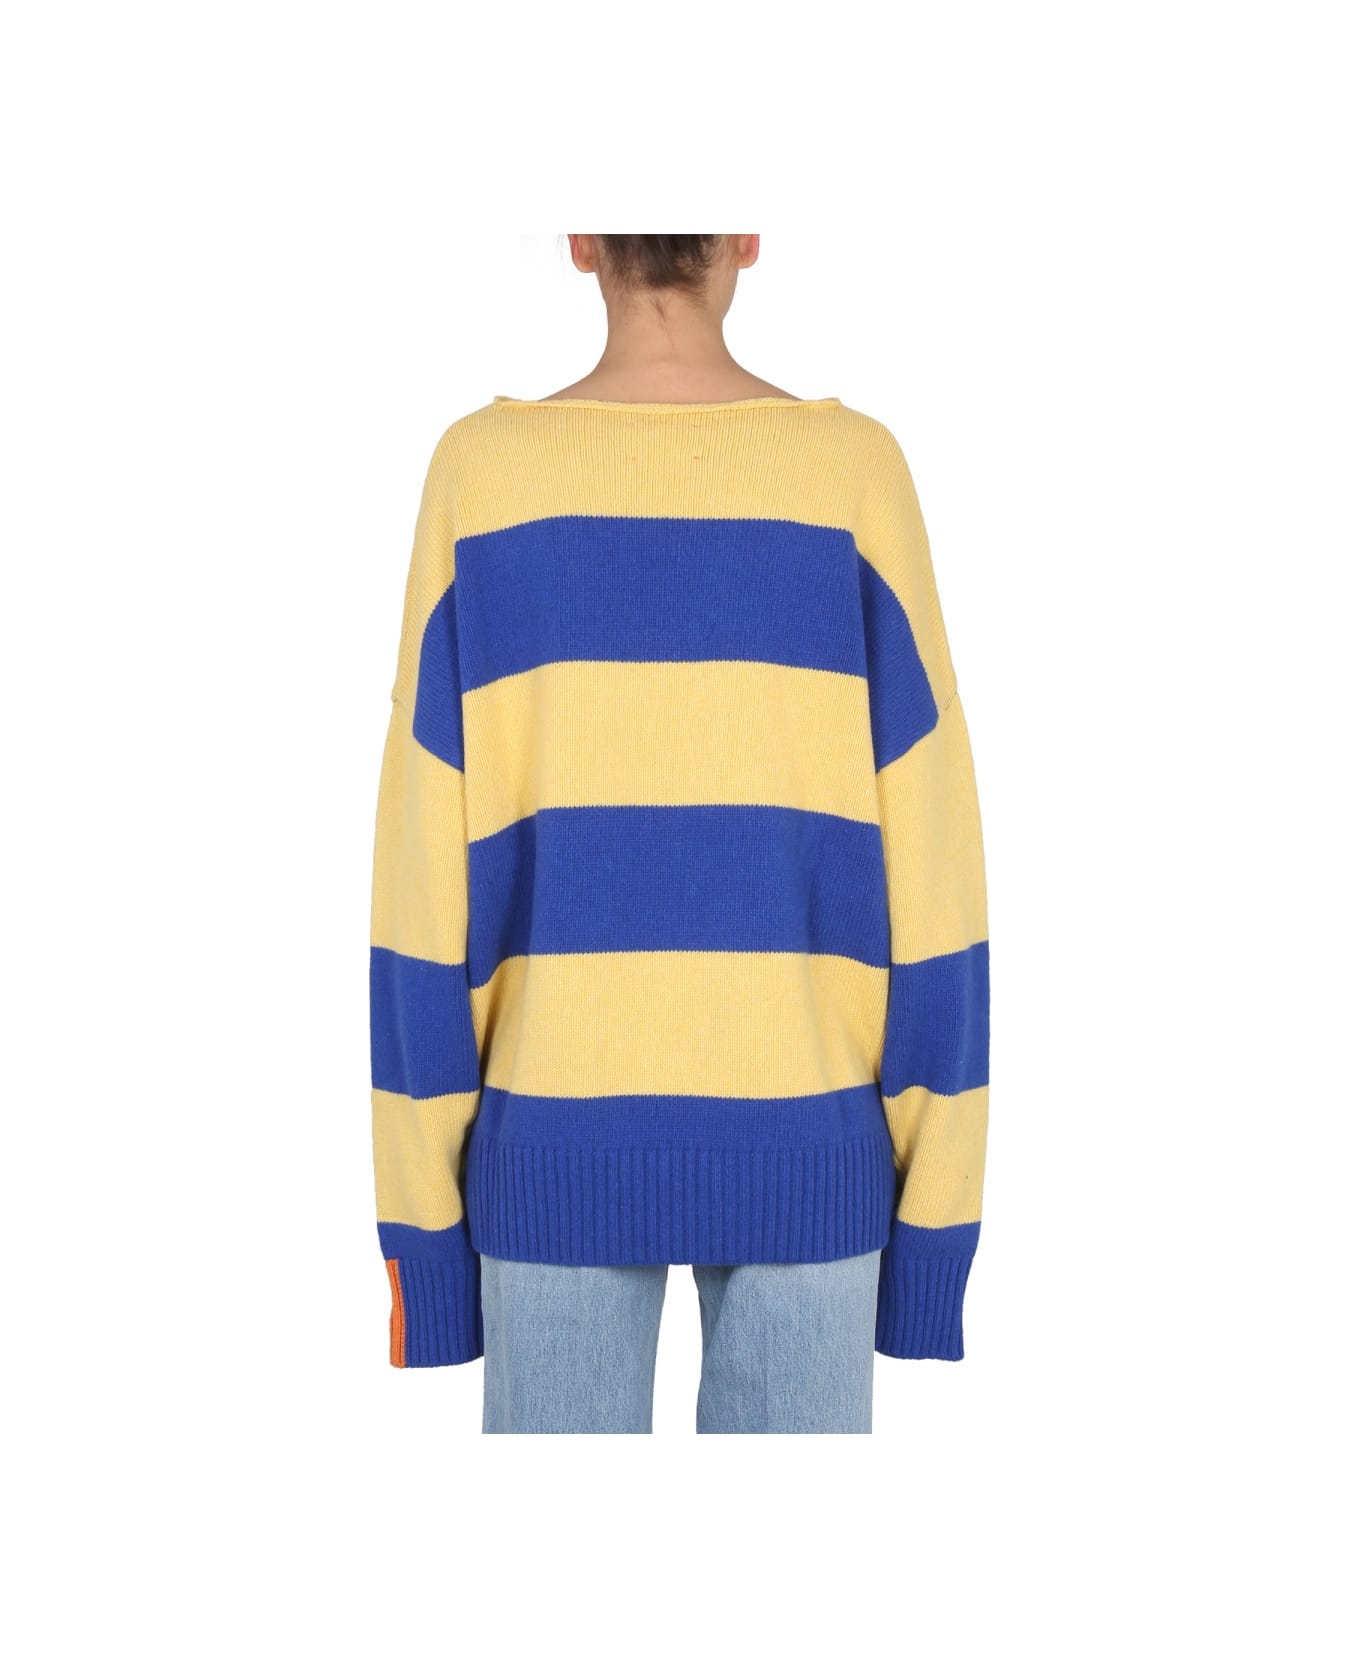 Right For Striped Shirt - YELLOW